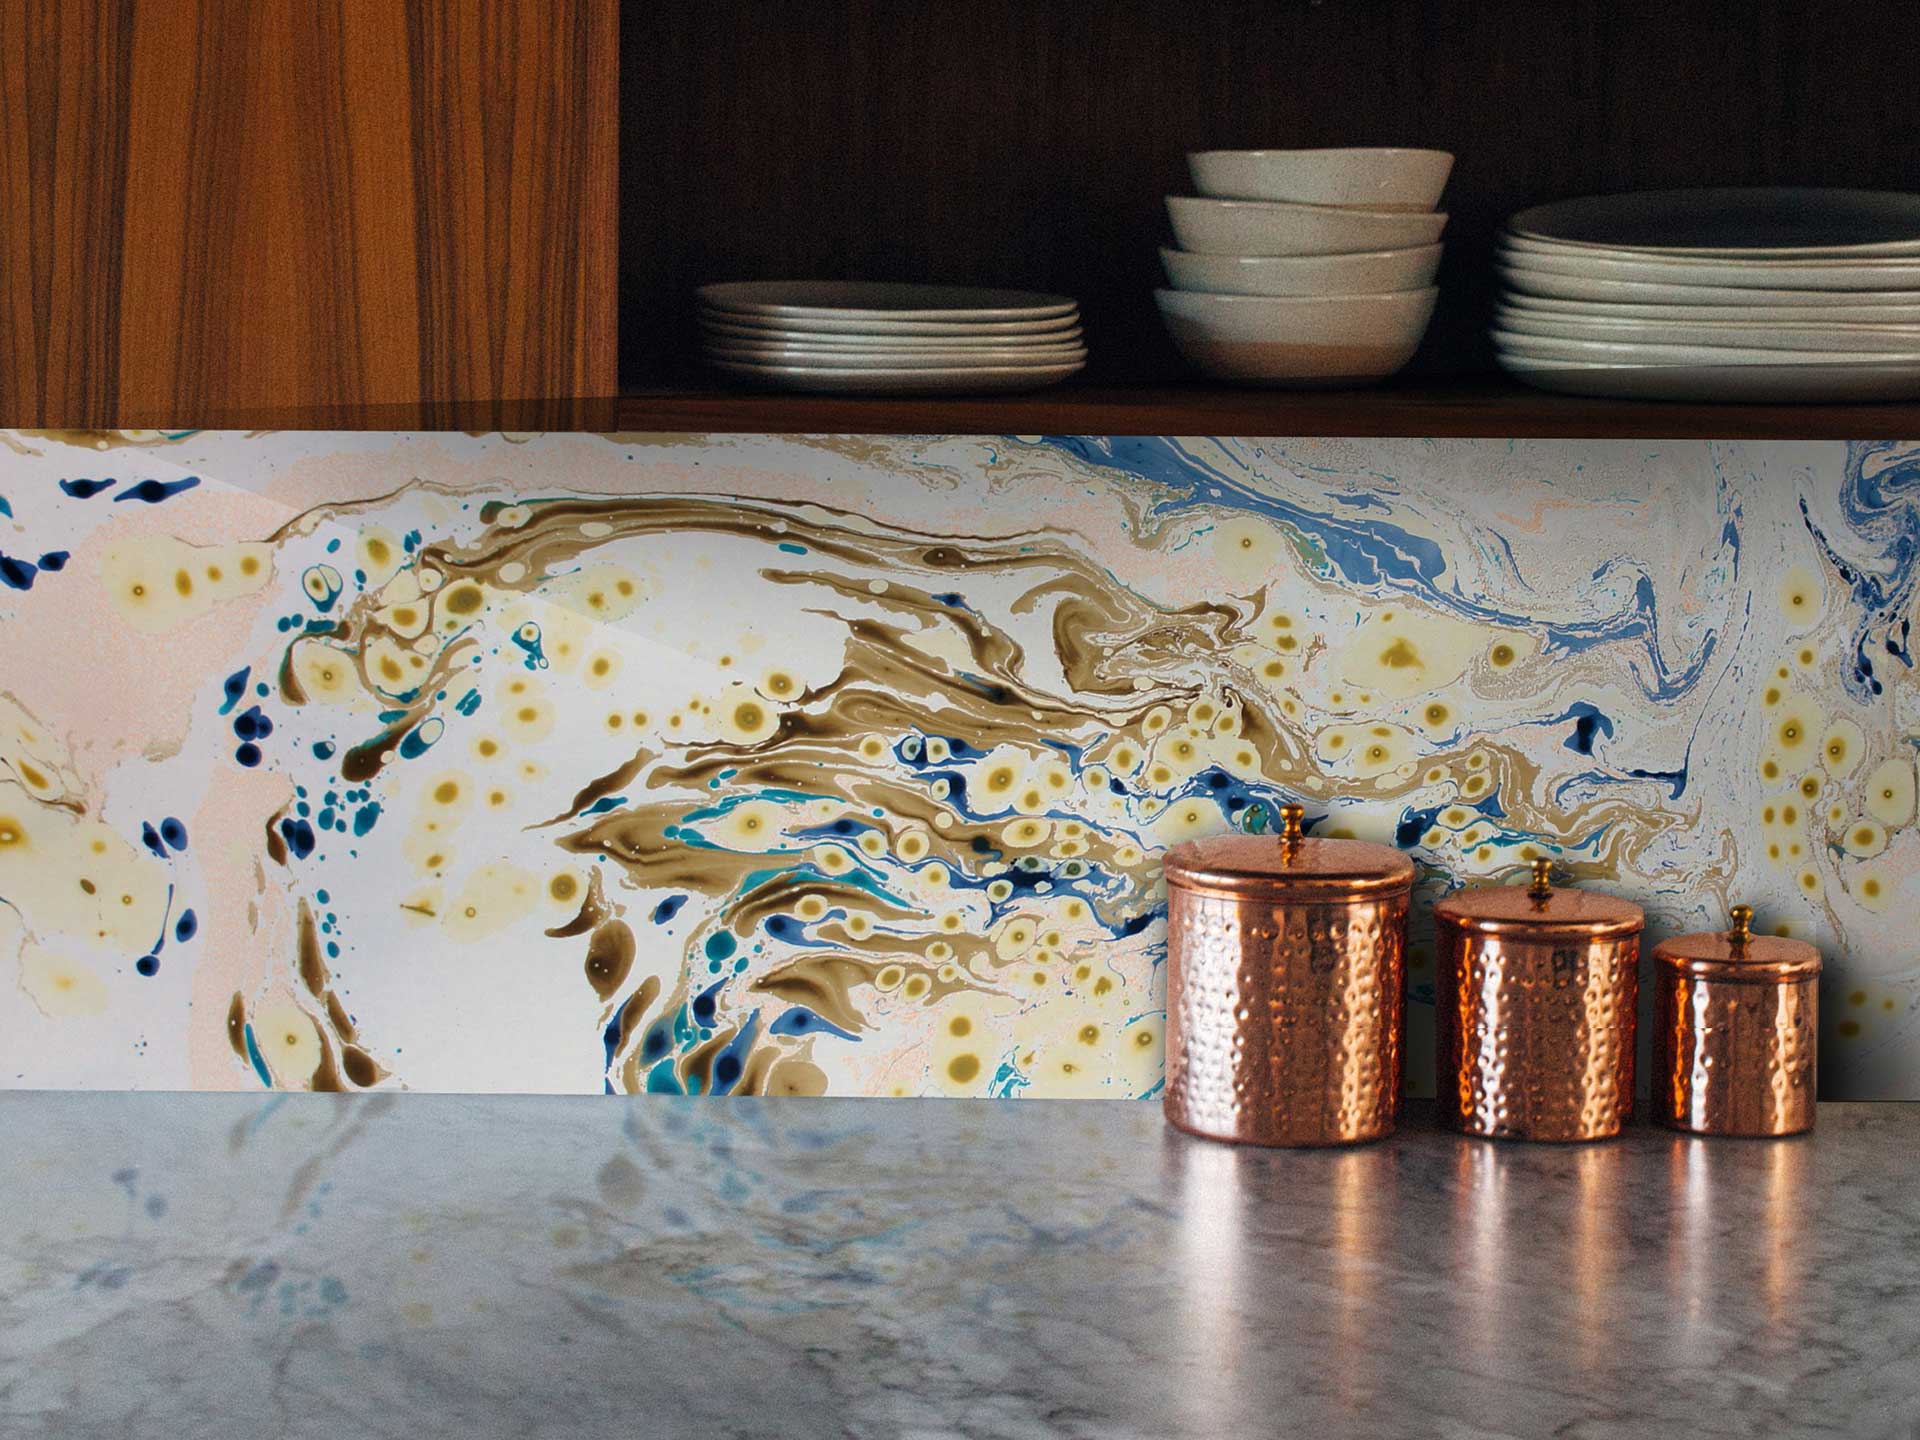 Marbled backsplashes add colour to your kitchen